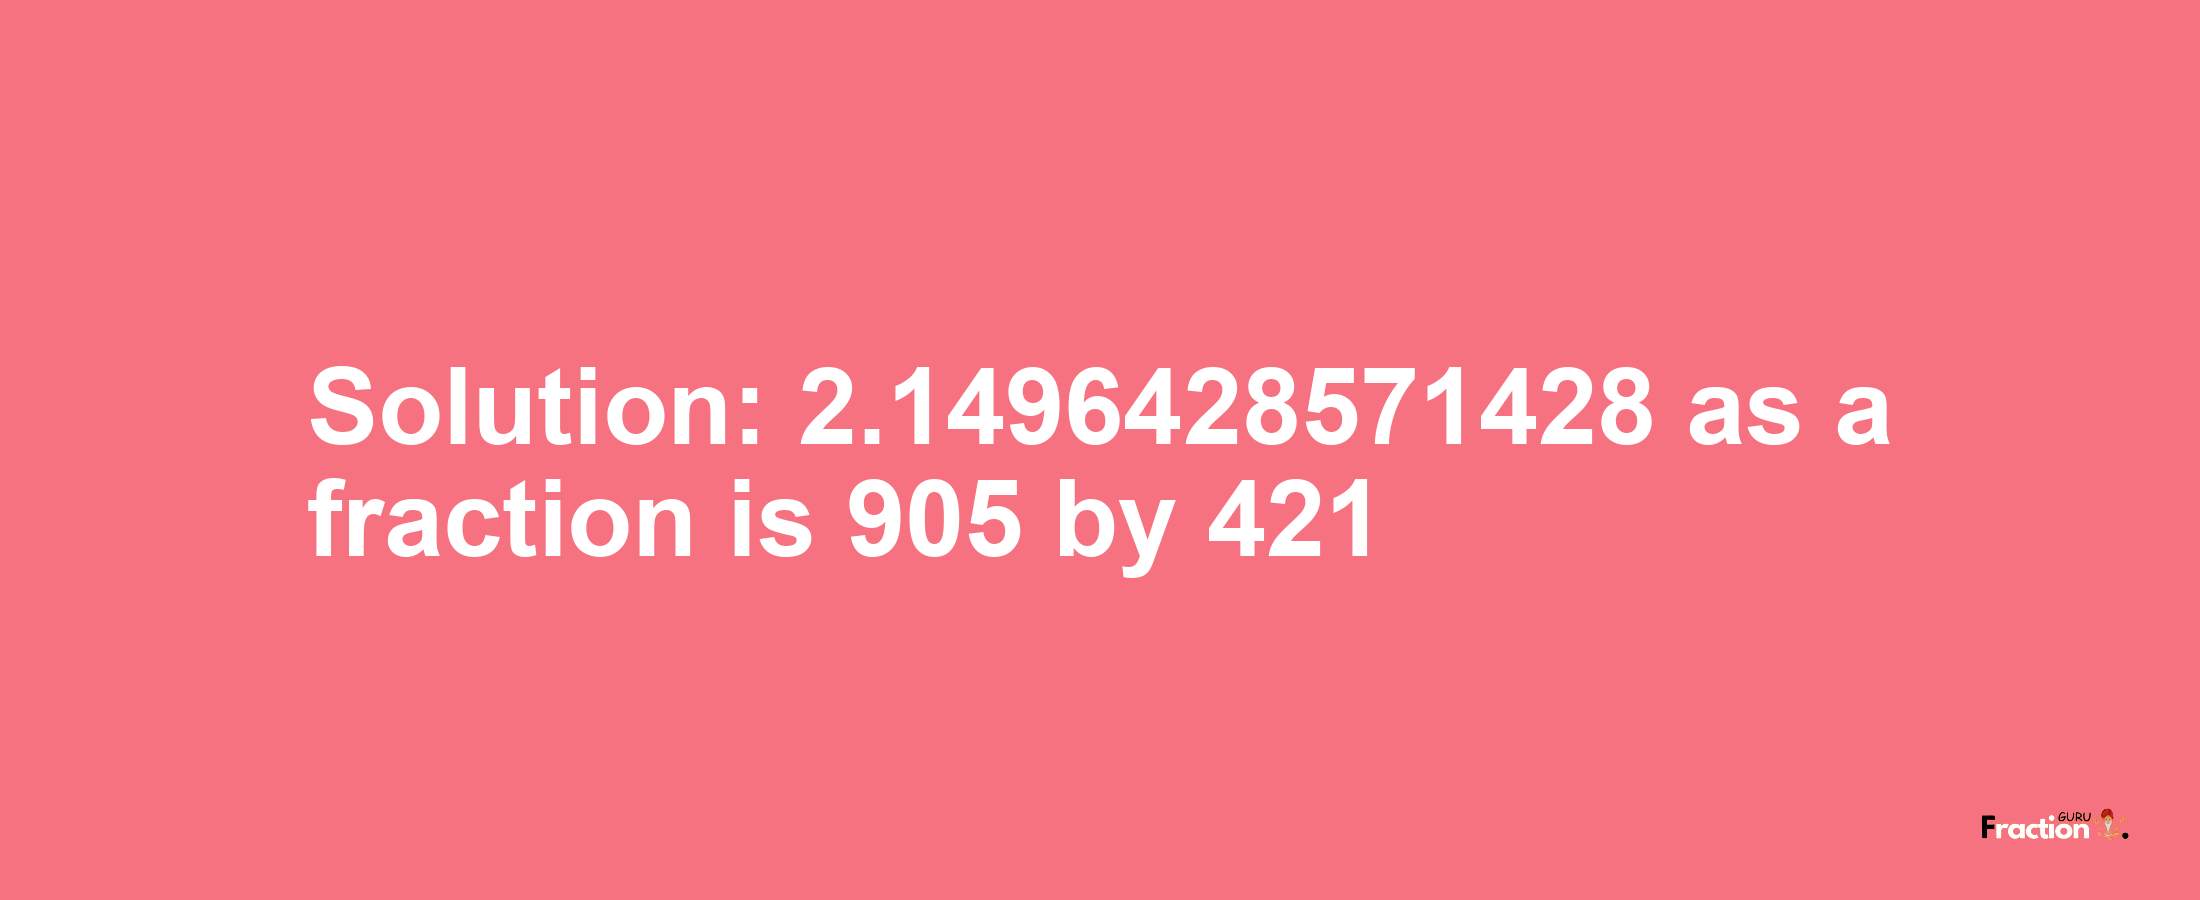 Solution:2.1496428571428 as a fraction is 905/421